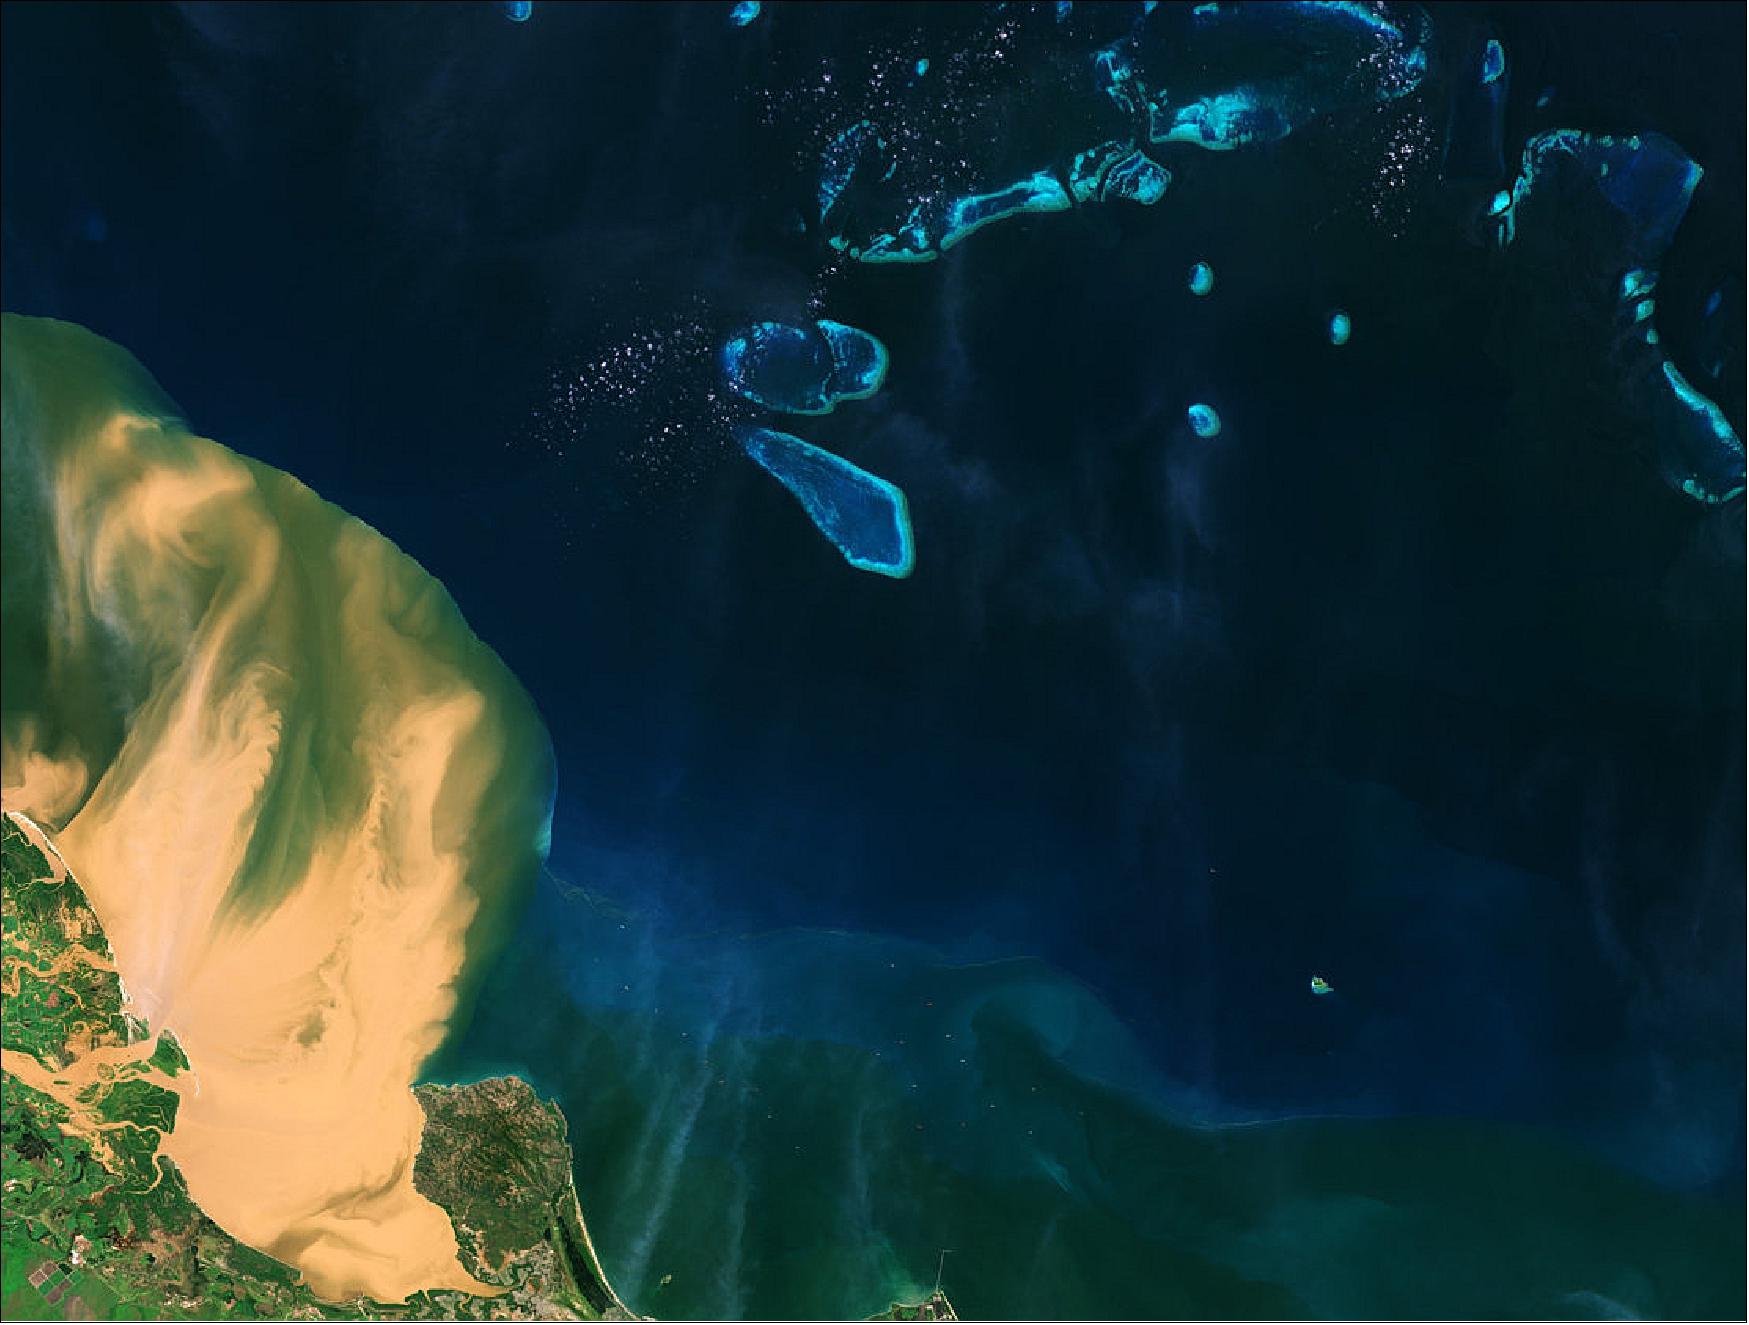 Figure 35: This image was captured a few days after the torrential rain, and shows the muddy waters flowing from the Burdekin River into the Coral Sea. It was captured on 10 February 2019, it is also featured on the Earth from Space video program (image credit: ESA, the image contains modified Copernicus Sentinel data (2019), processed by ESA, CC BY-SA 3.0 IGO)